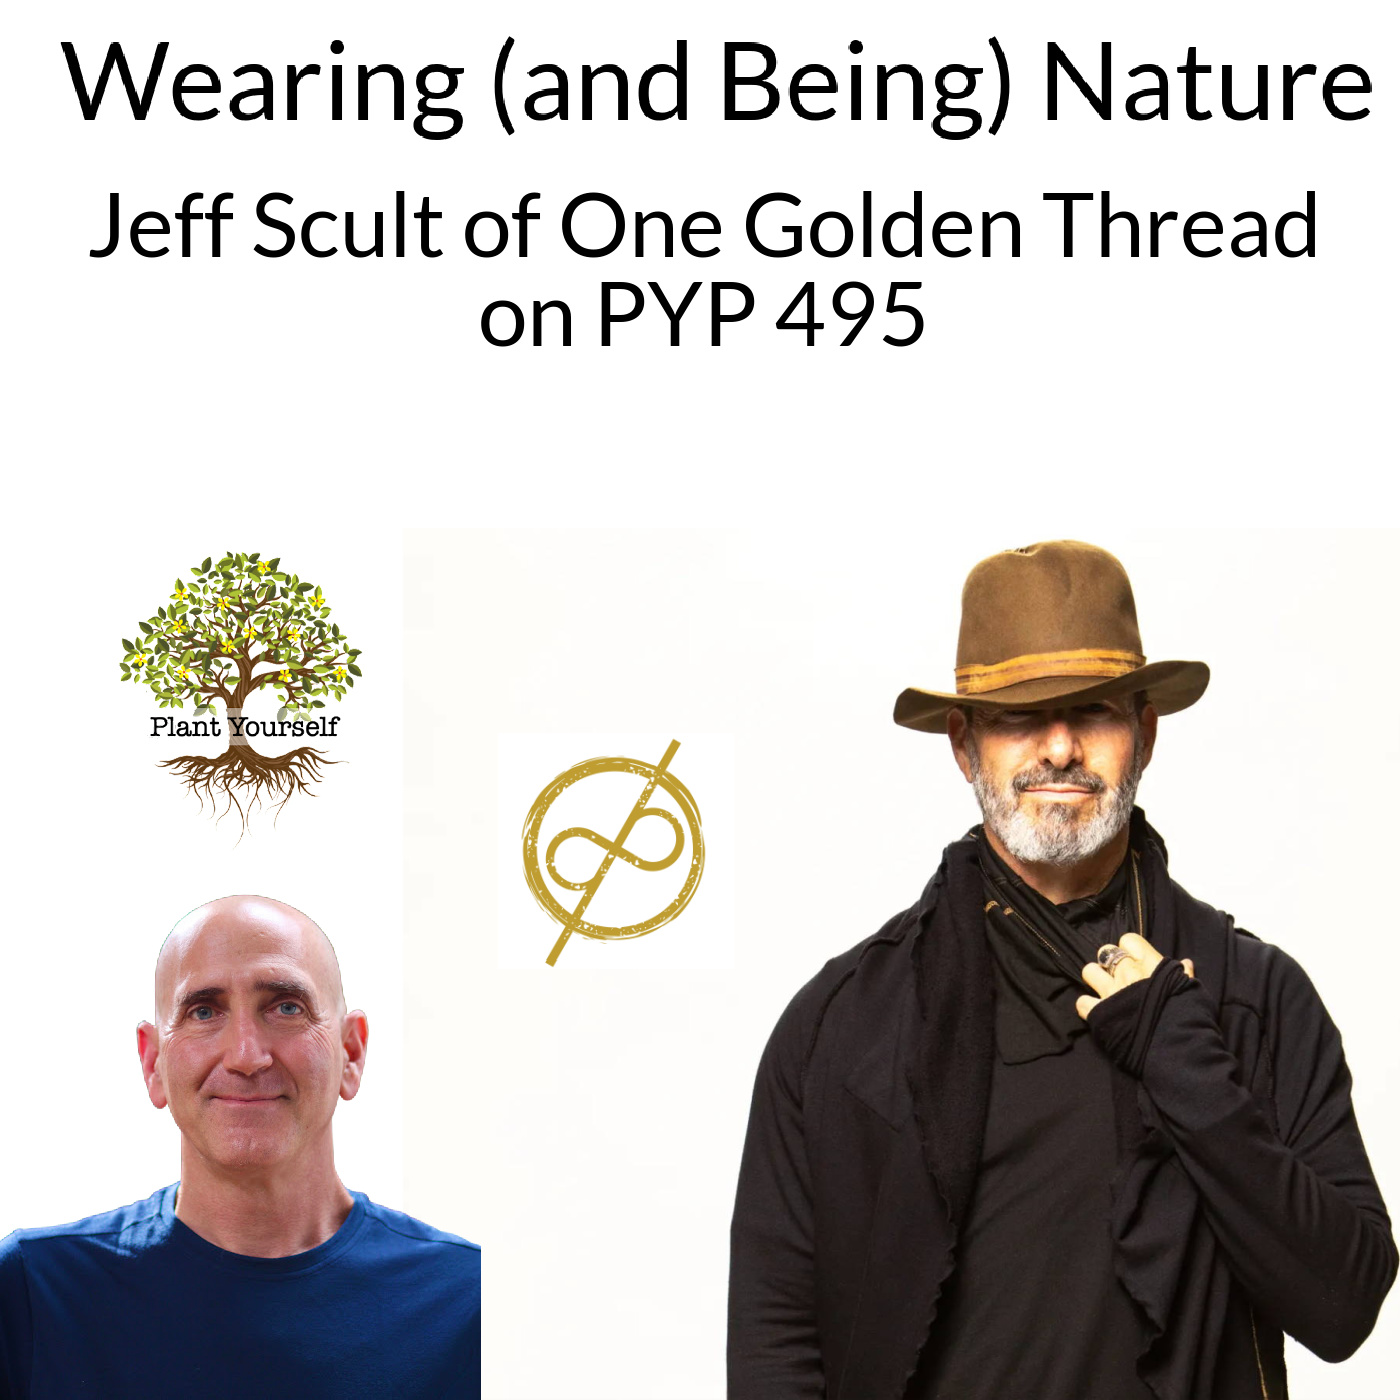 Wearing (and Being) Nature: Jeff Scult on PYP 495